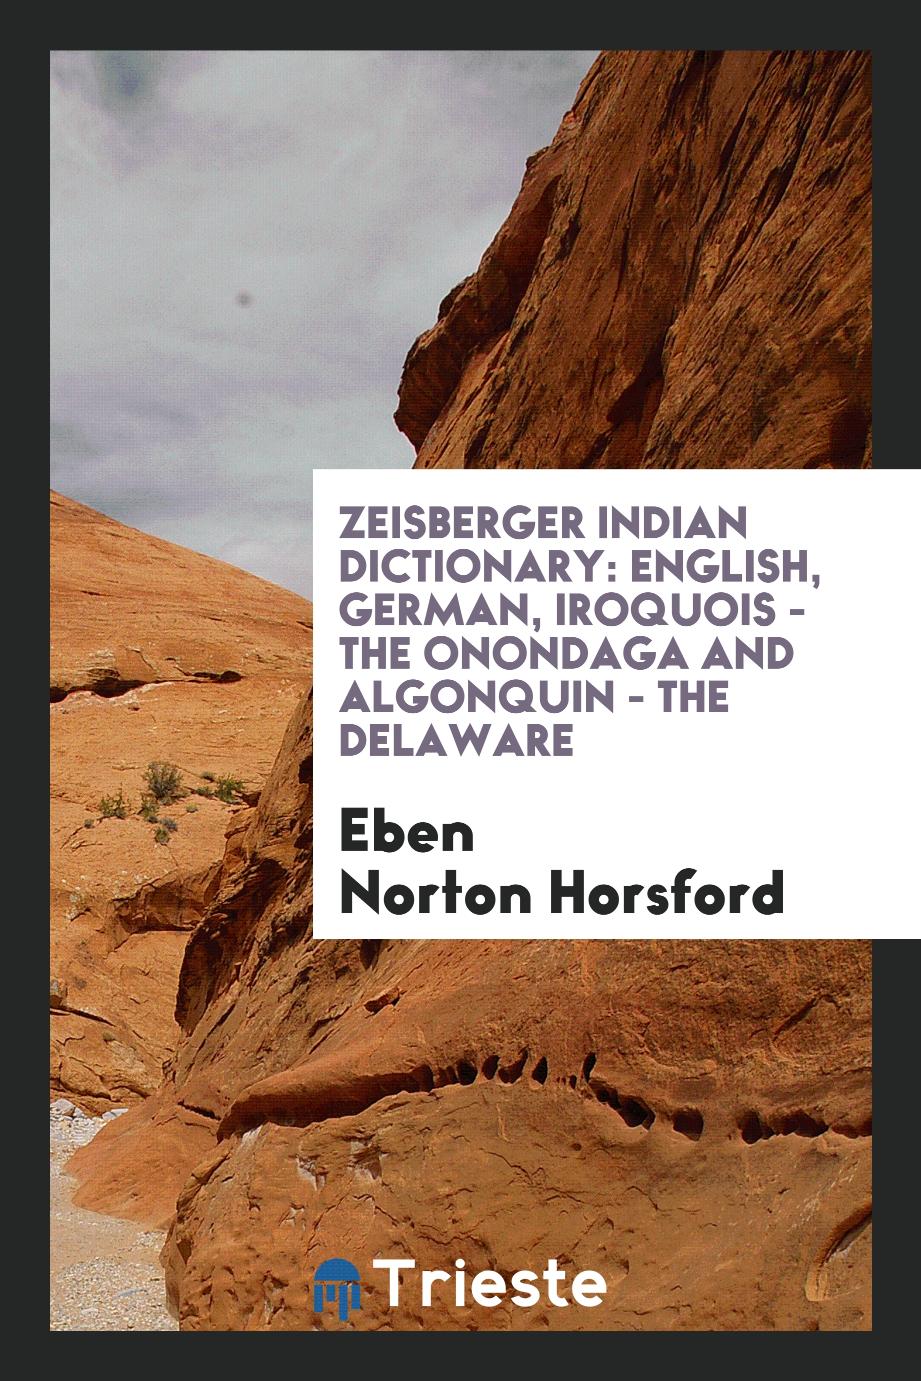 Zeisberger Indian Dictionary: English, German, Iroquois - the Onondaga and Algonquin - the Delaware